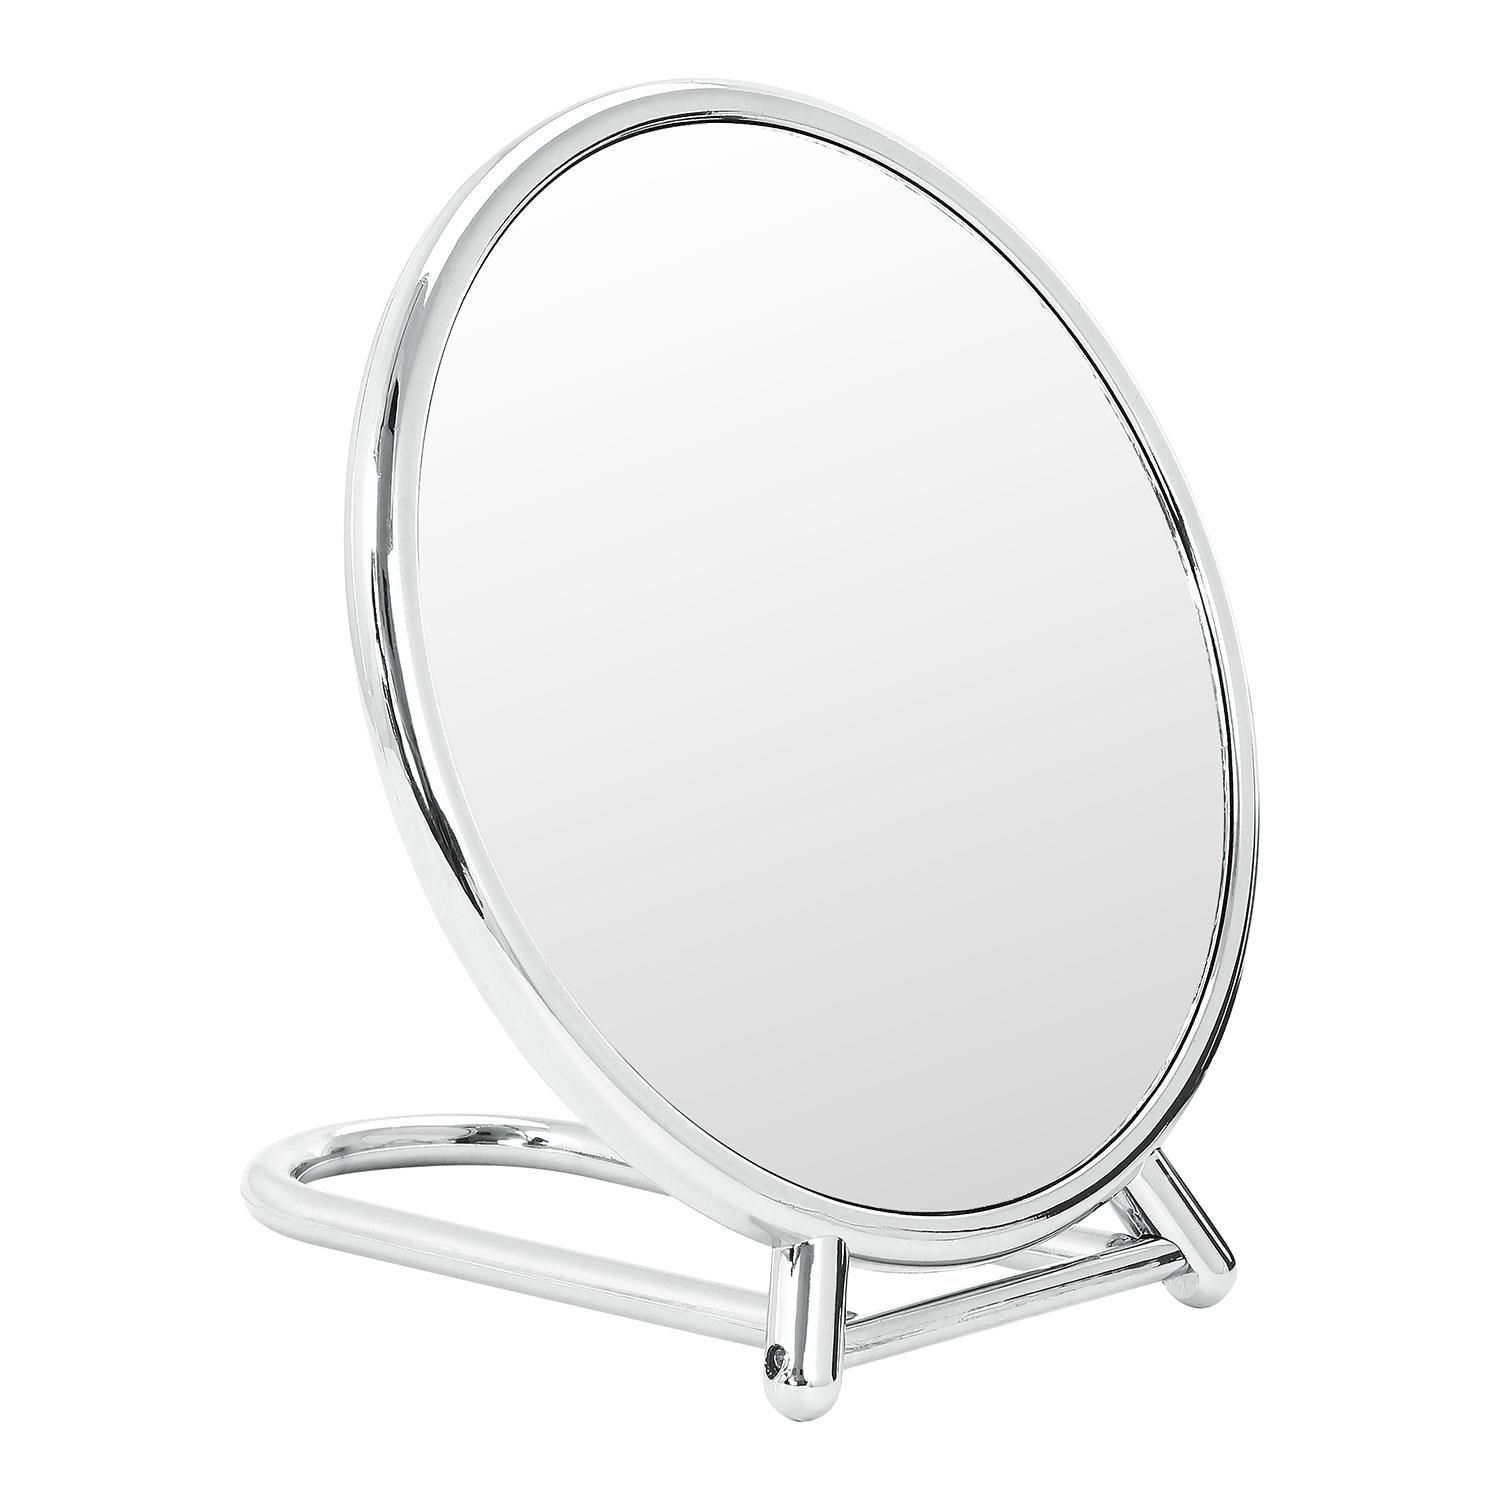 Wall Mounted Standing Bathroom Shaving Make Up Adjustable Chrome Round For Single Sided Chrome Makeup Stand Mirrors (View 12 of 15)